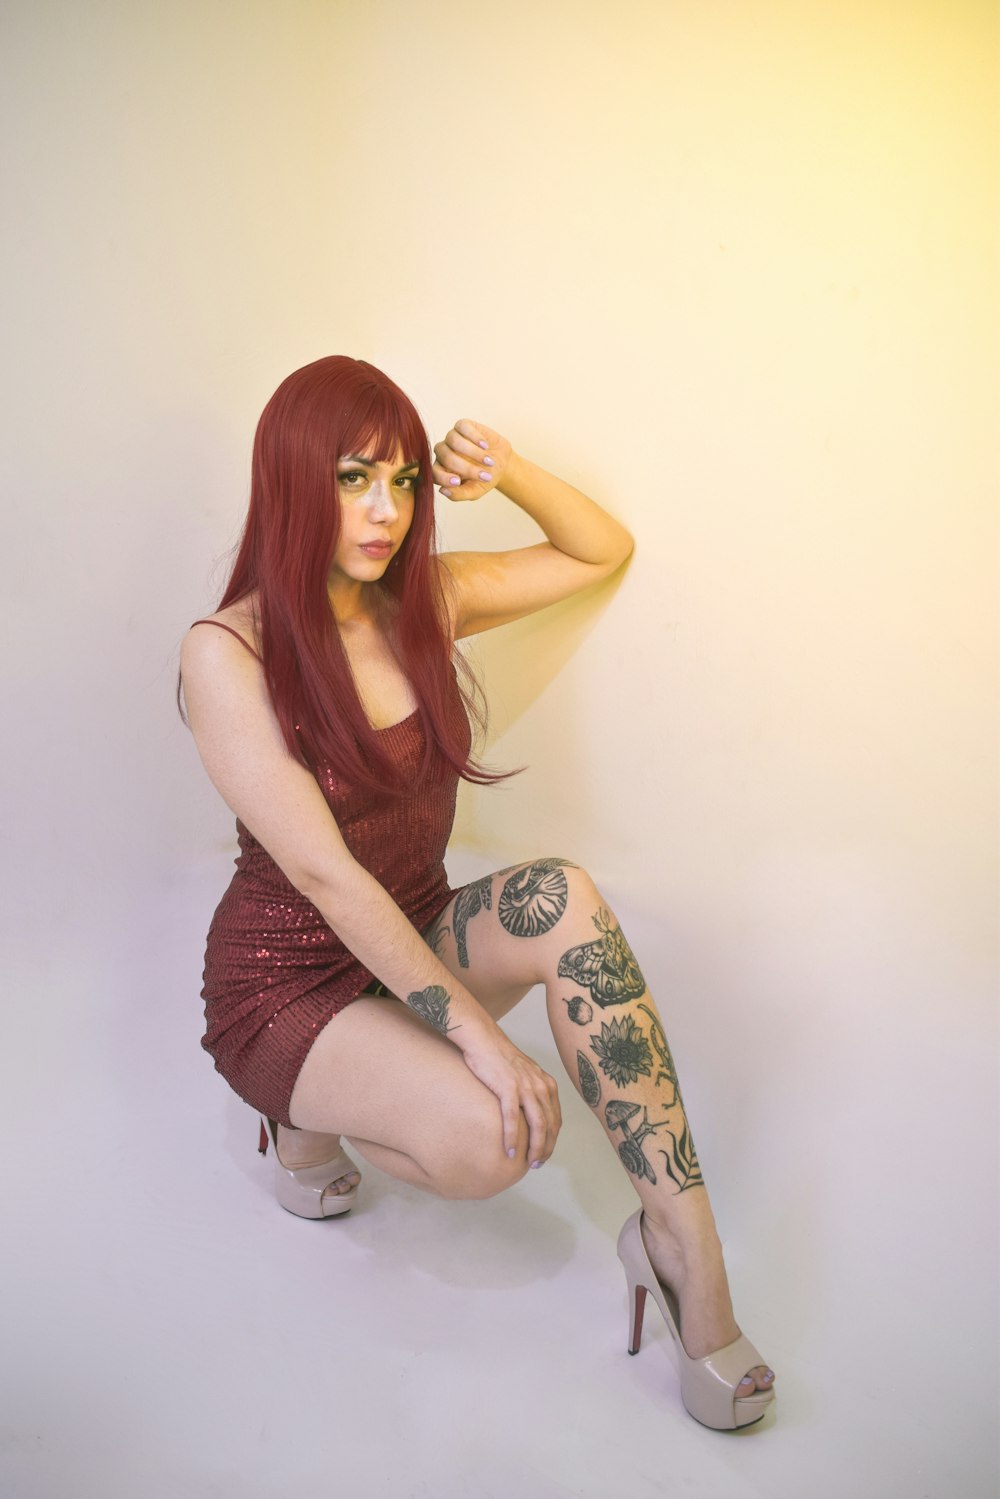 a woman with red hair and tattoos posing for a picture